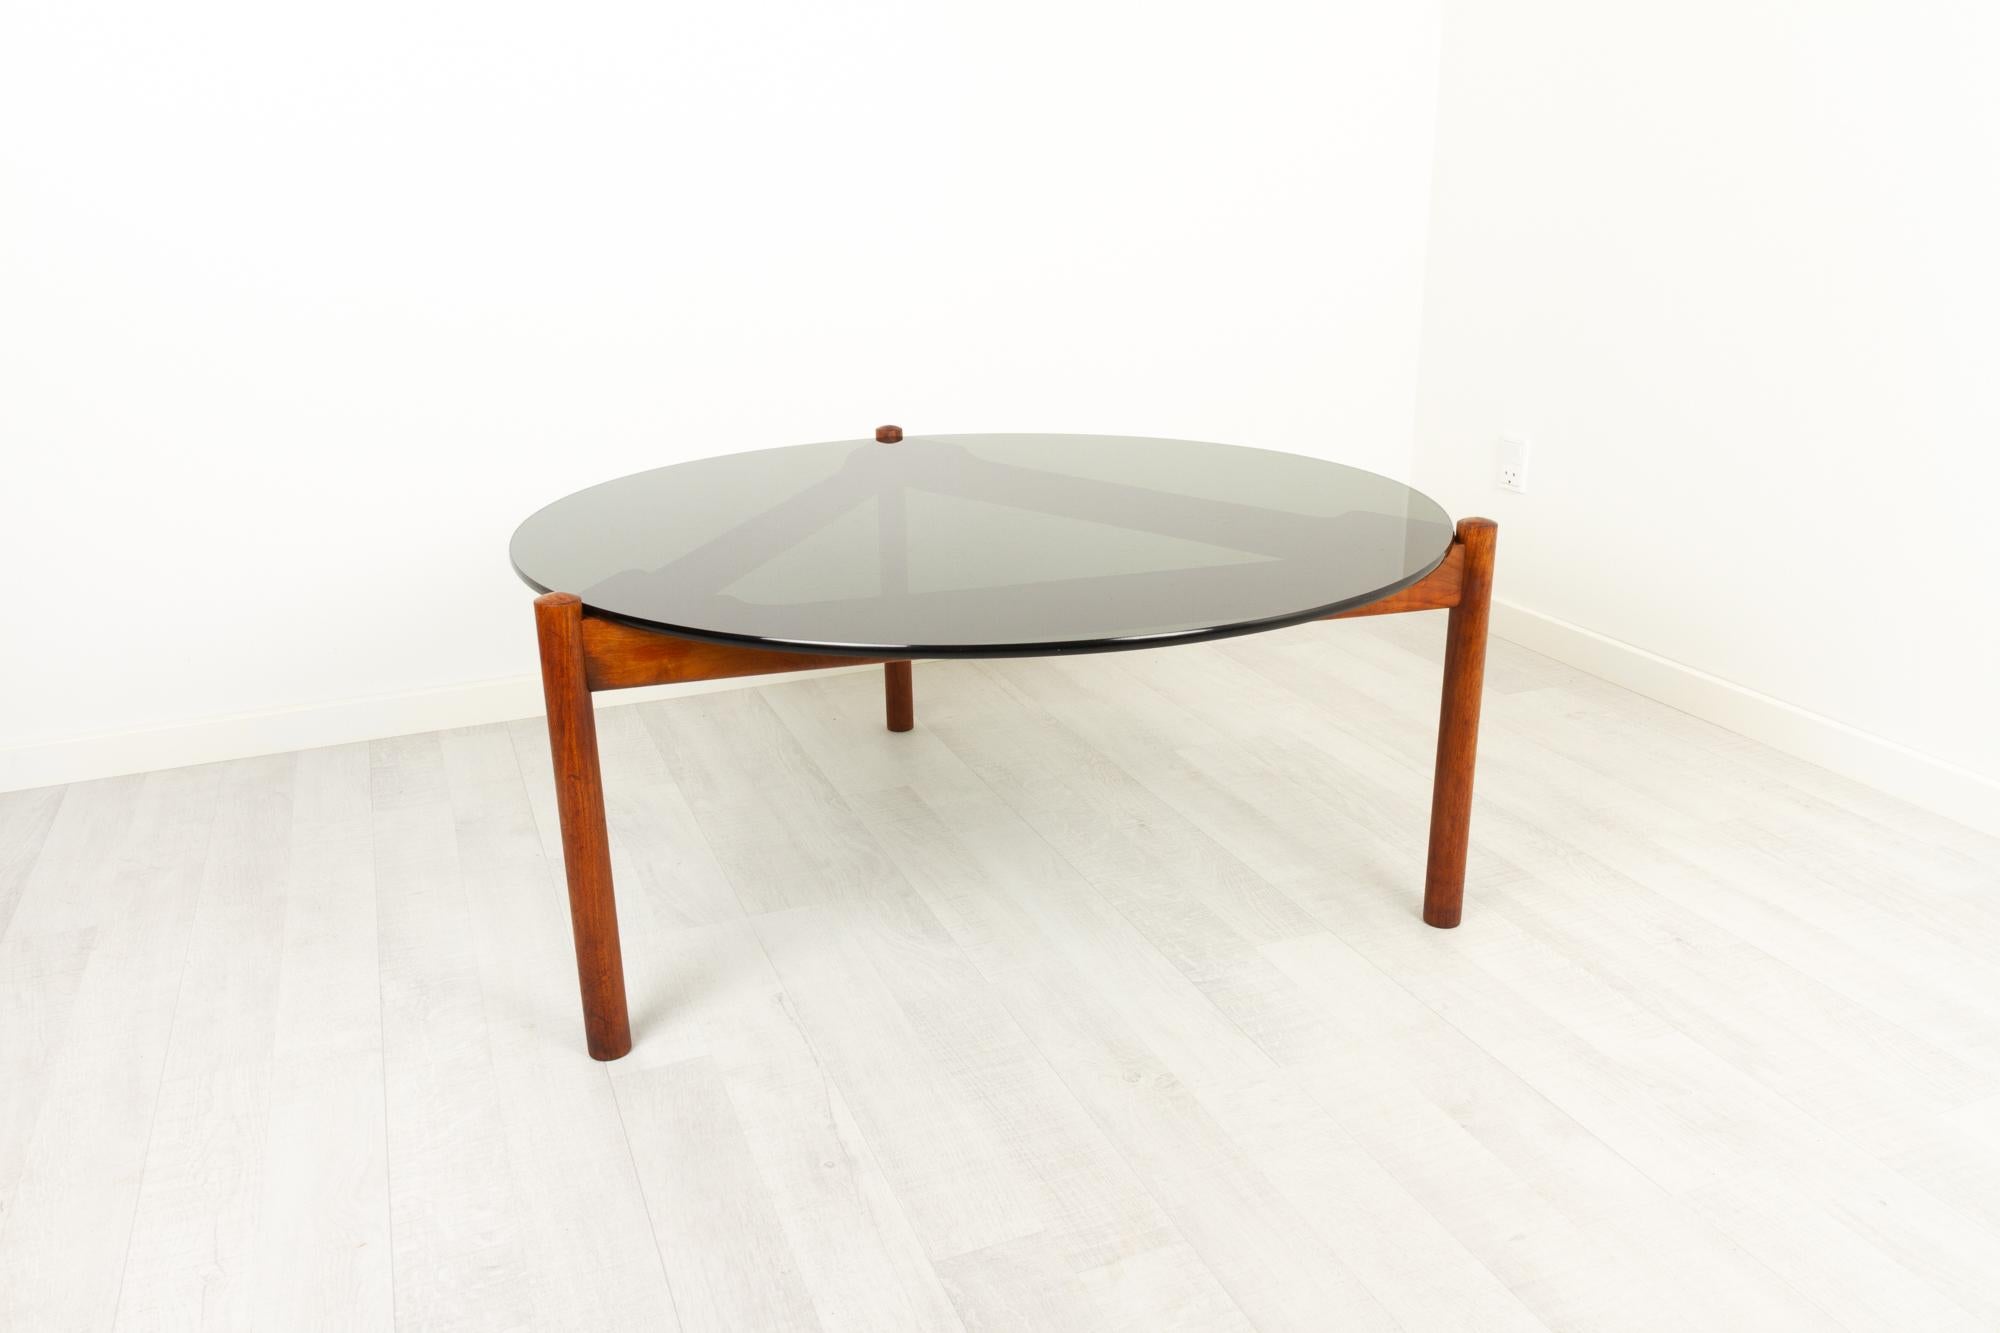 Danish modern teak and glass coffee table by Komfort, 1960s
Vintage Mid-Century Modern coffee table made by Komfort in the 1960s, and therefore most likely designed by Sven Ellekær.
Three legged frame in solid teak with round legs. Beautiful